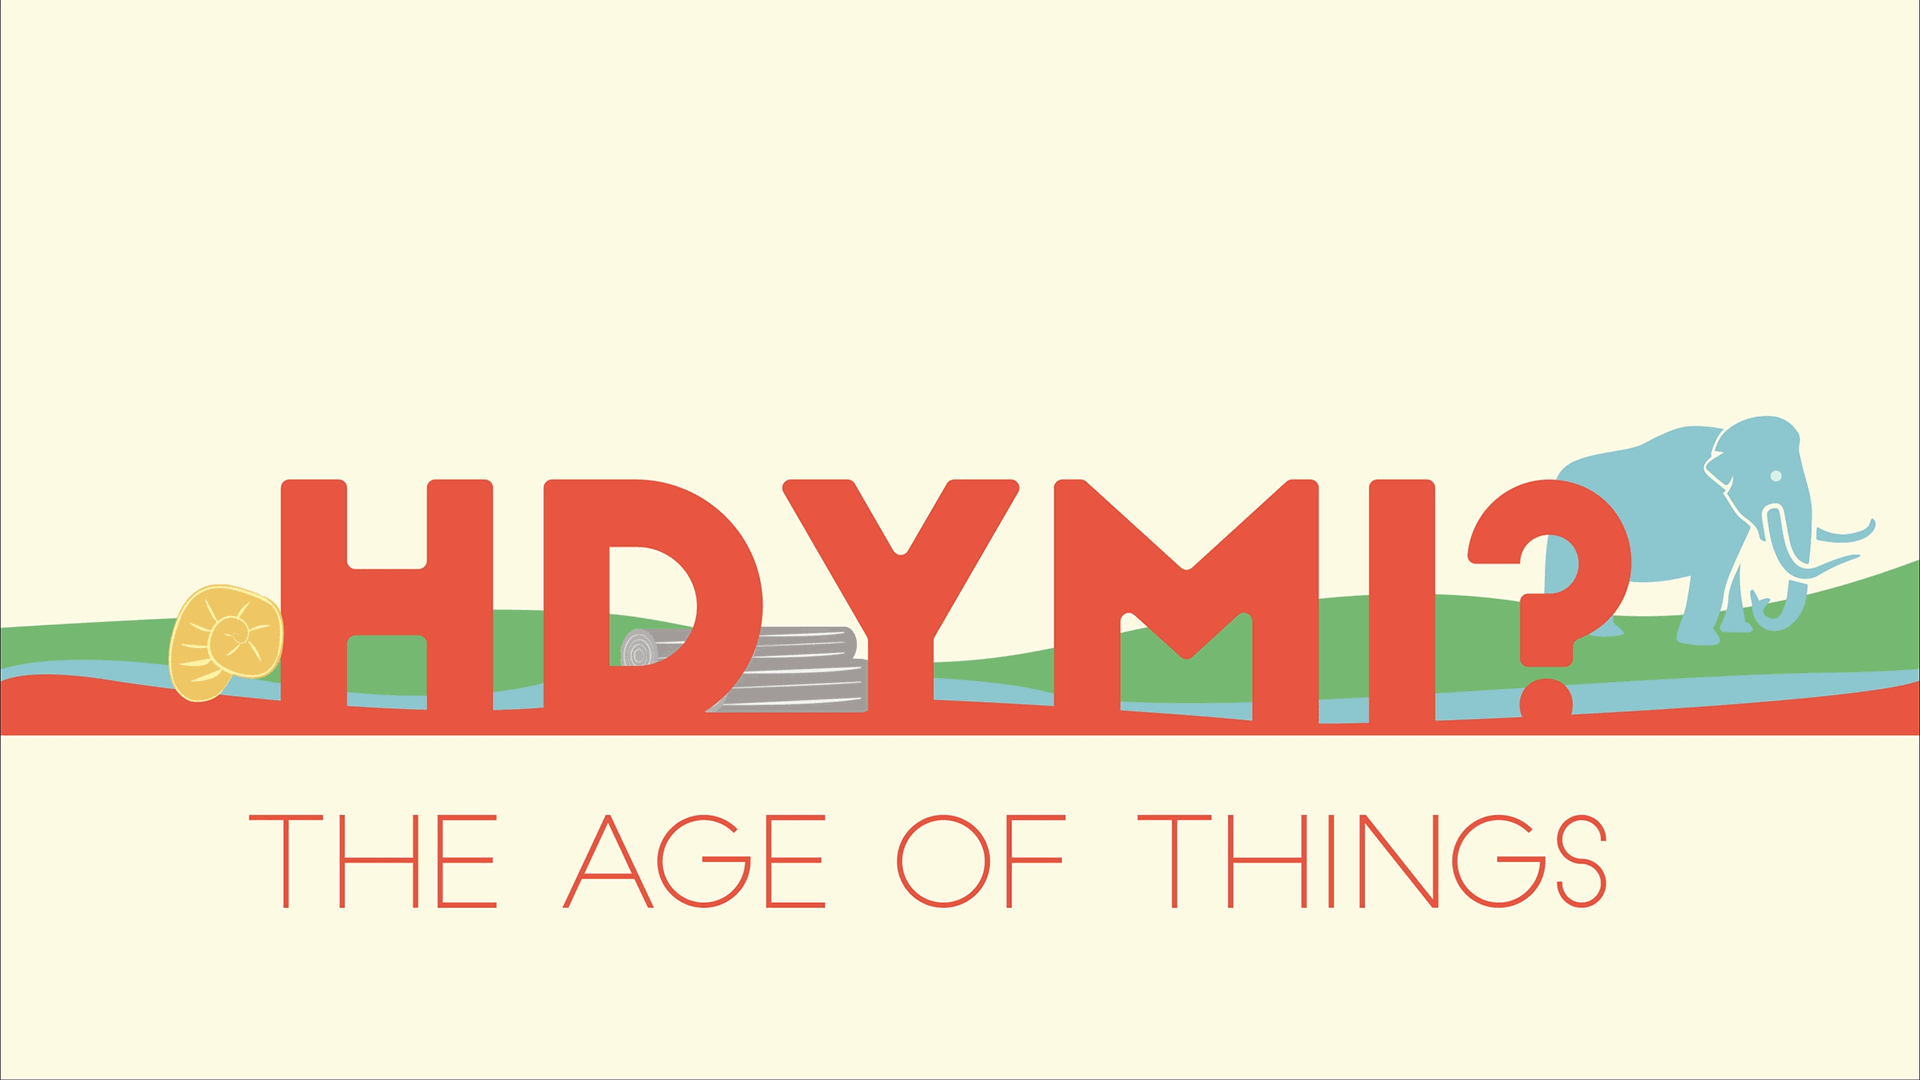 Animated illustration says "HDYMI? The Age of Things" with images of sun, tree, mammoth.